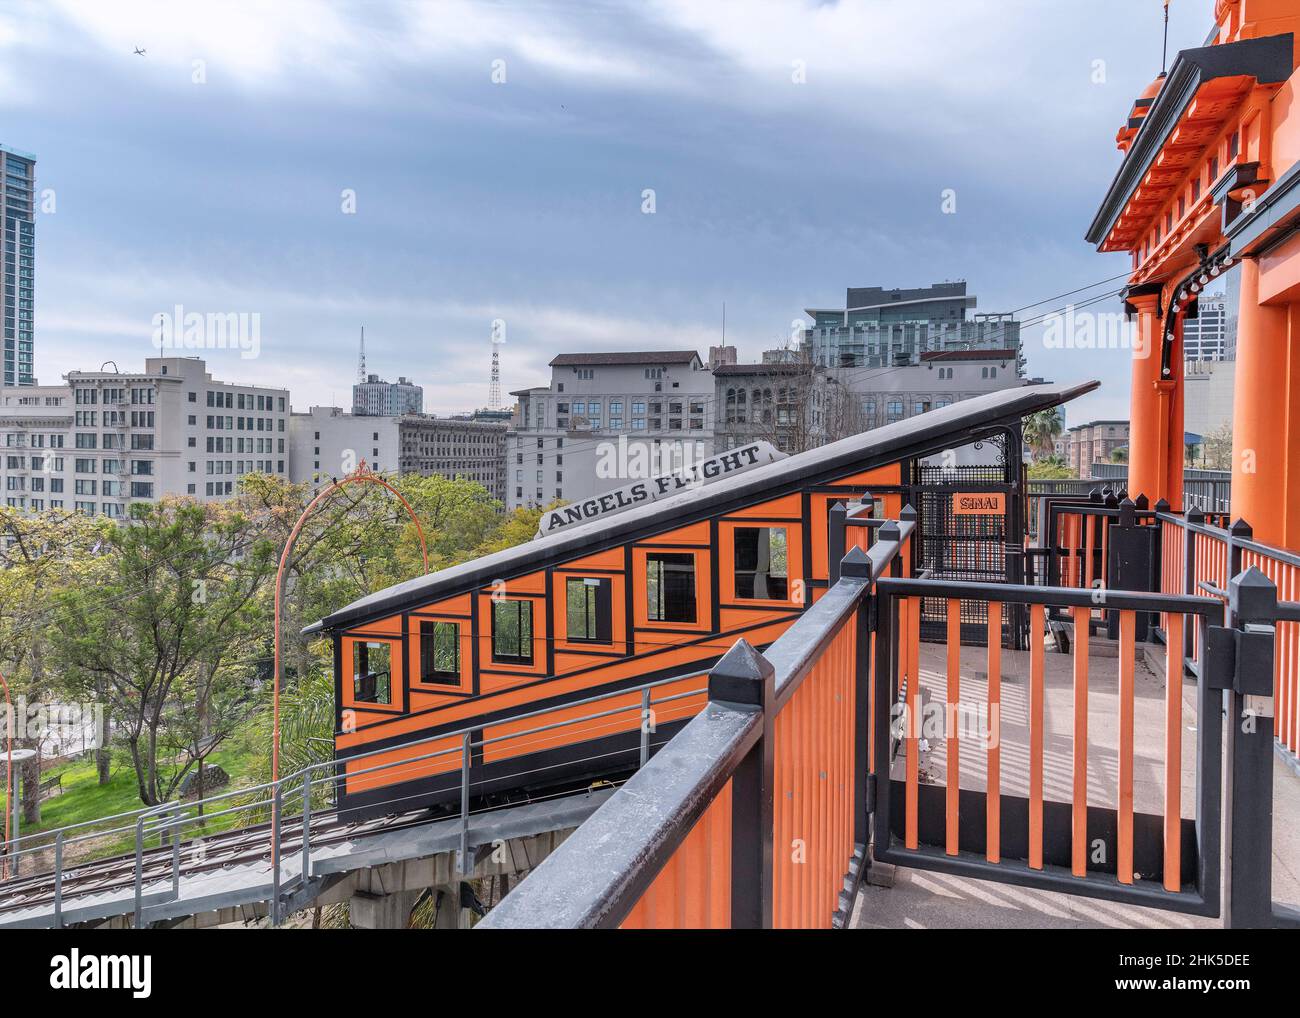 Los Angeles, CA, USA - January 31, 2022 - Historic Angels Flight funicular railway in the Bunker Hill district of downtown Los Angeles, CA. Stock Photo